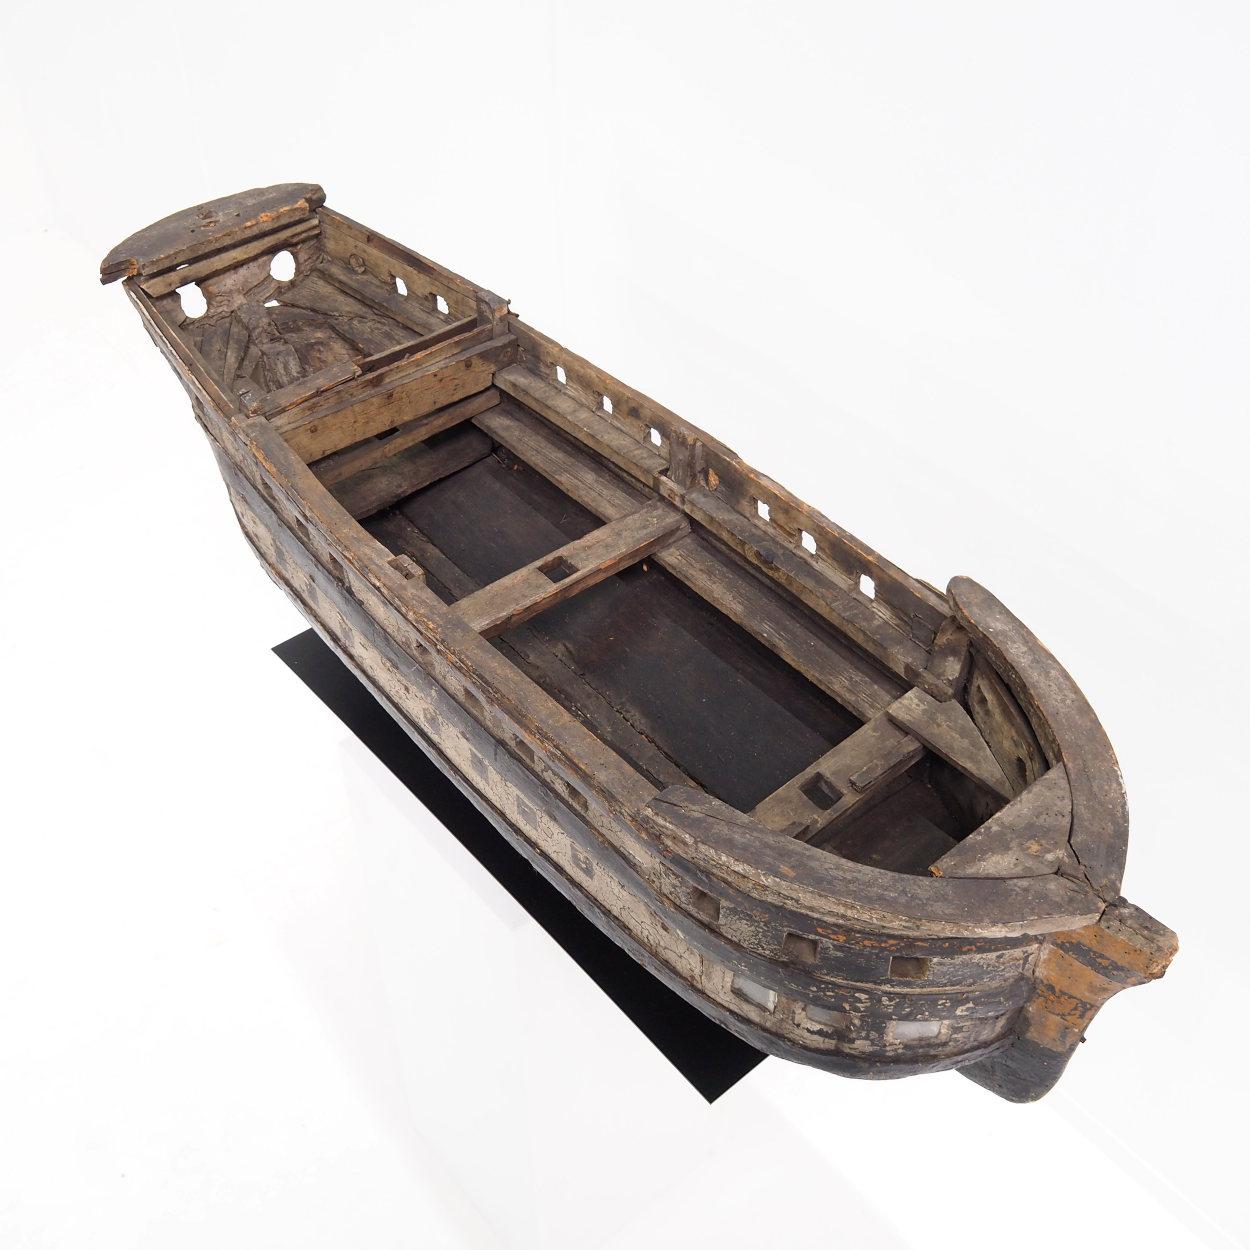 Folk Art Very Decorative Antique Ship Model with Beautiful Wear and Tear For Sale